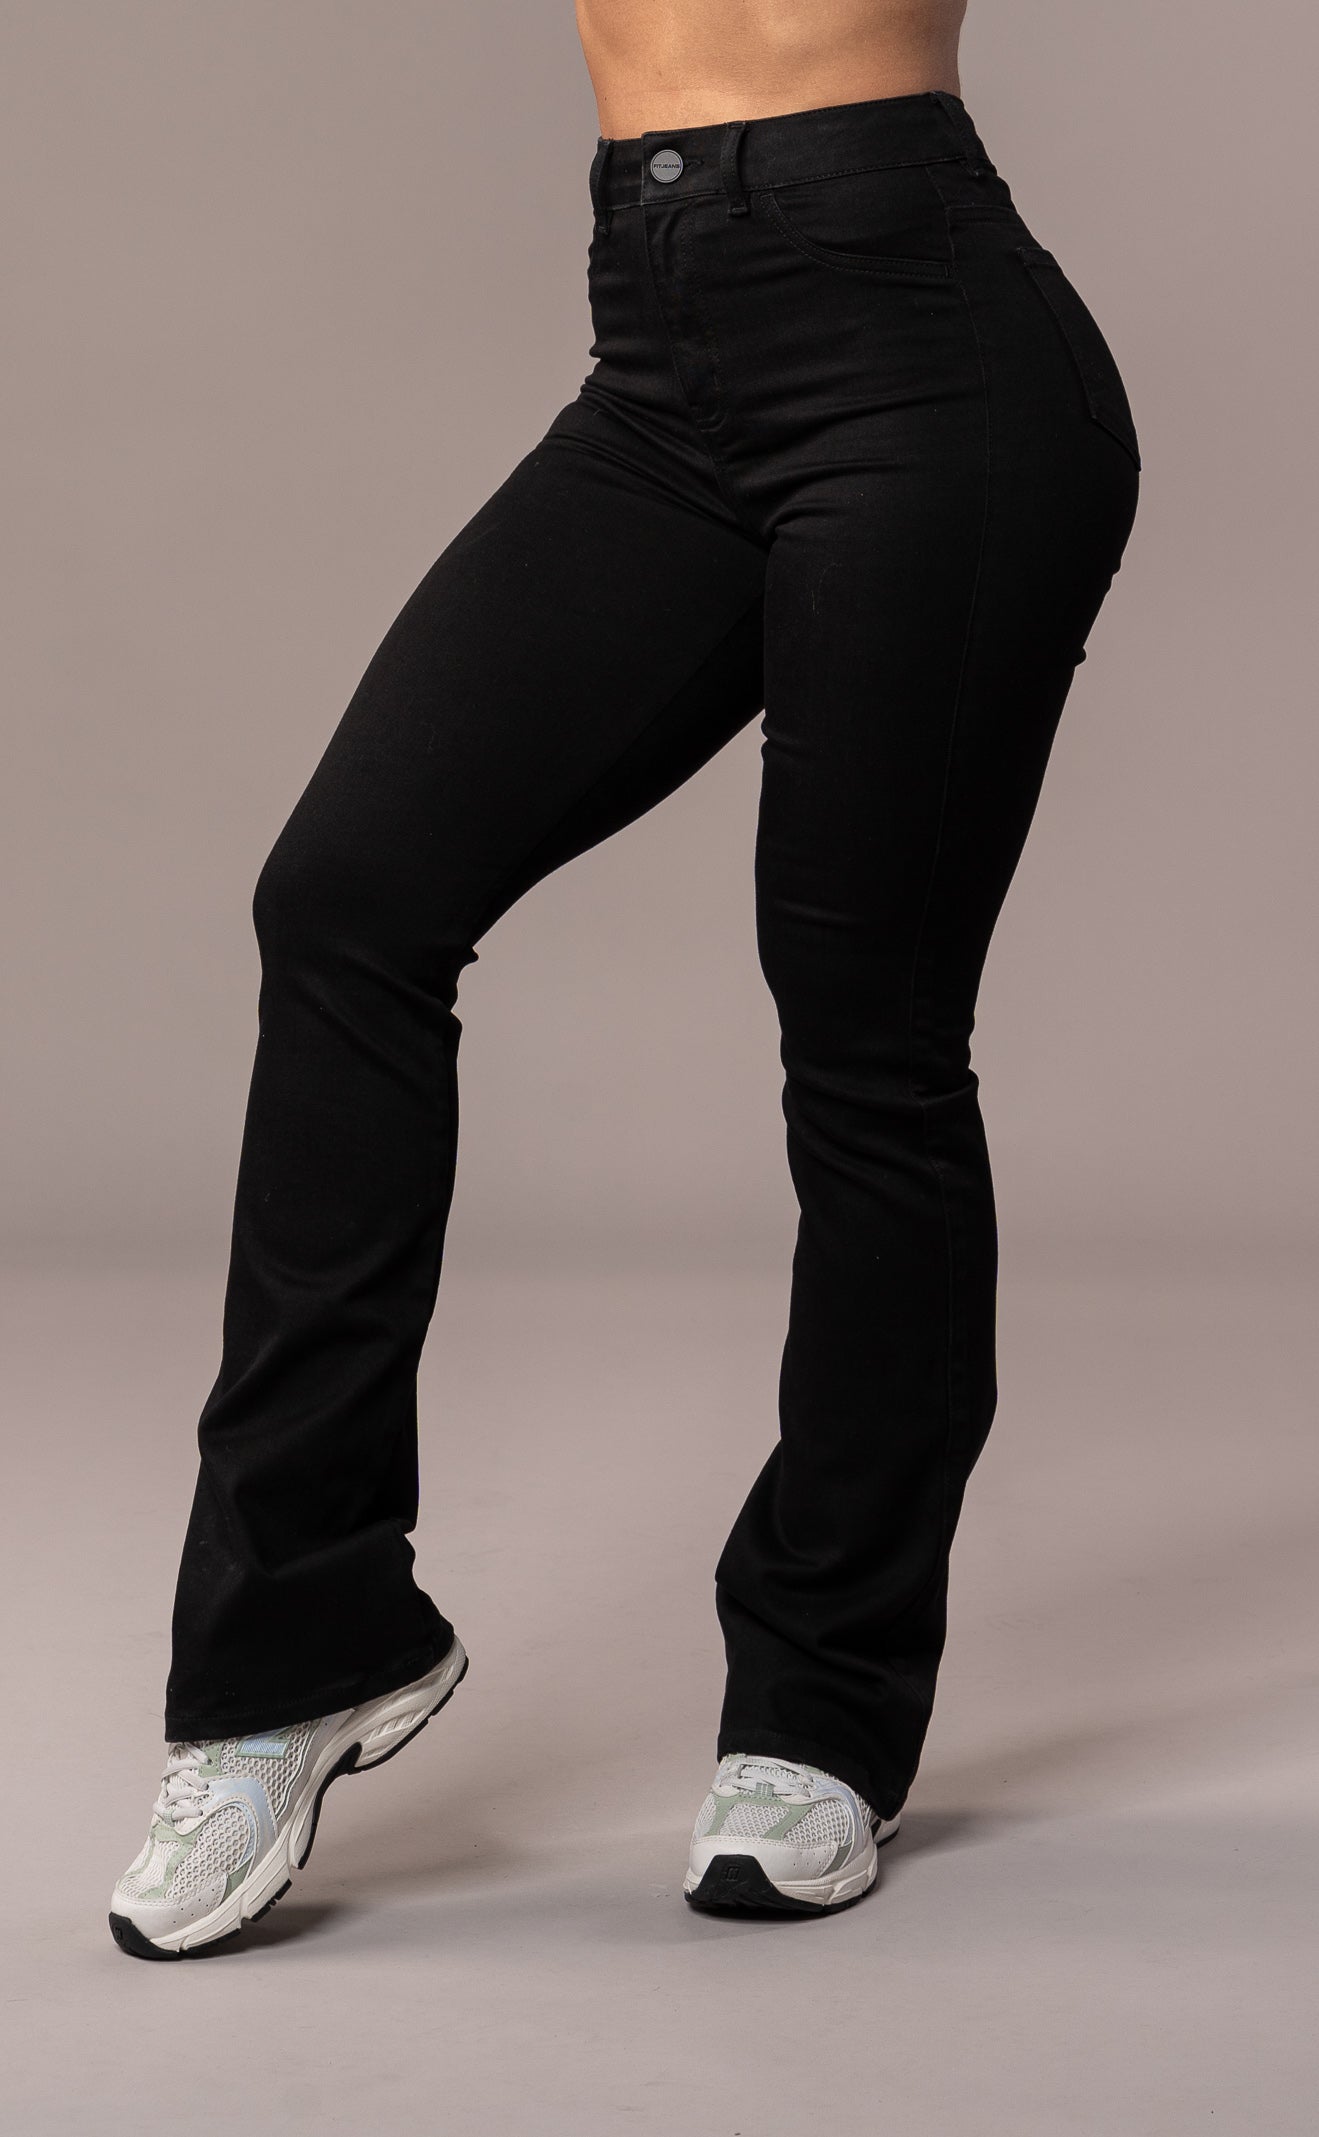 Womens Flared Fitjeans - Black Flared FITJEANS   